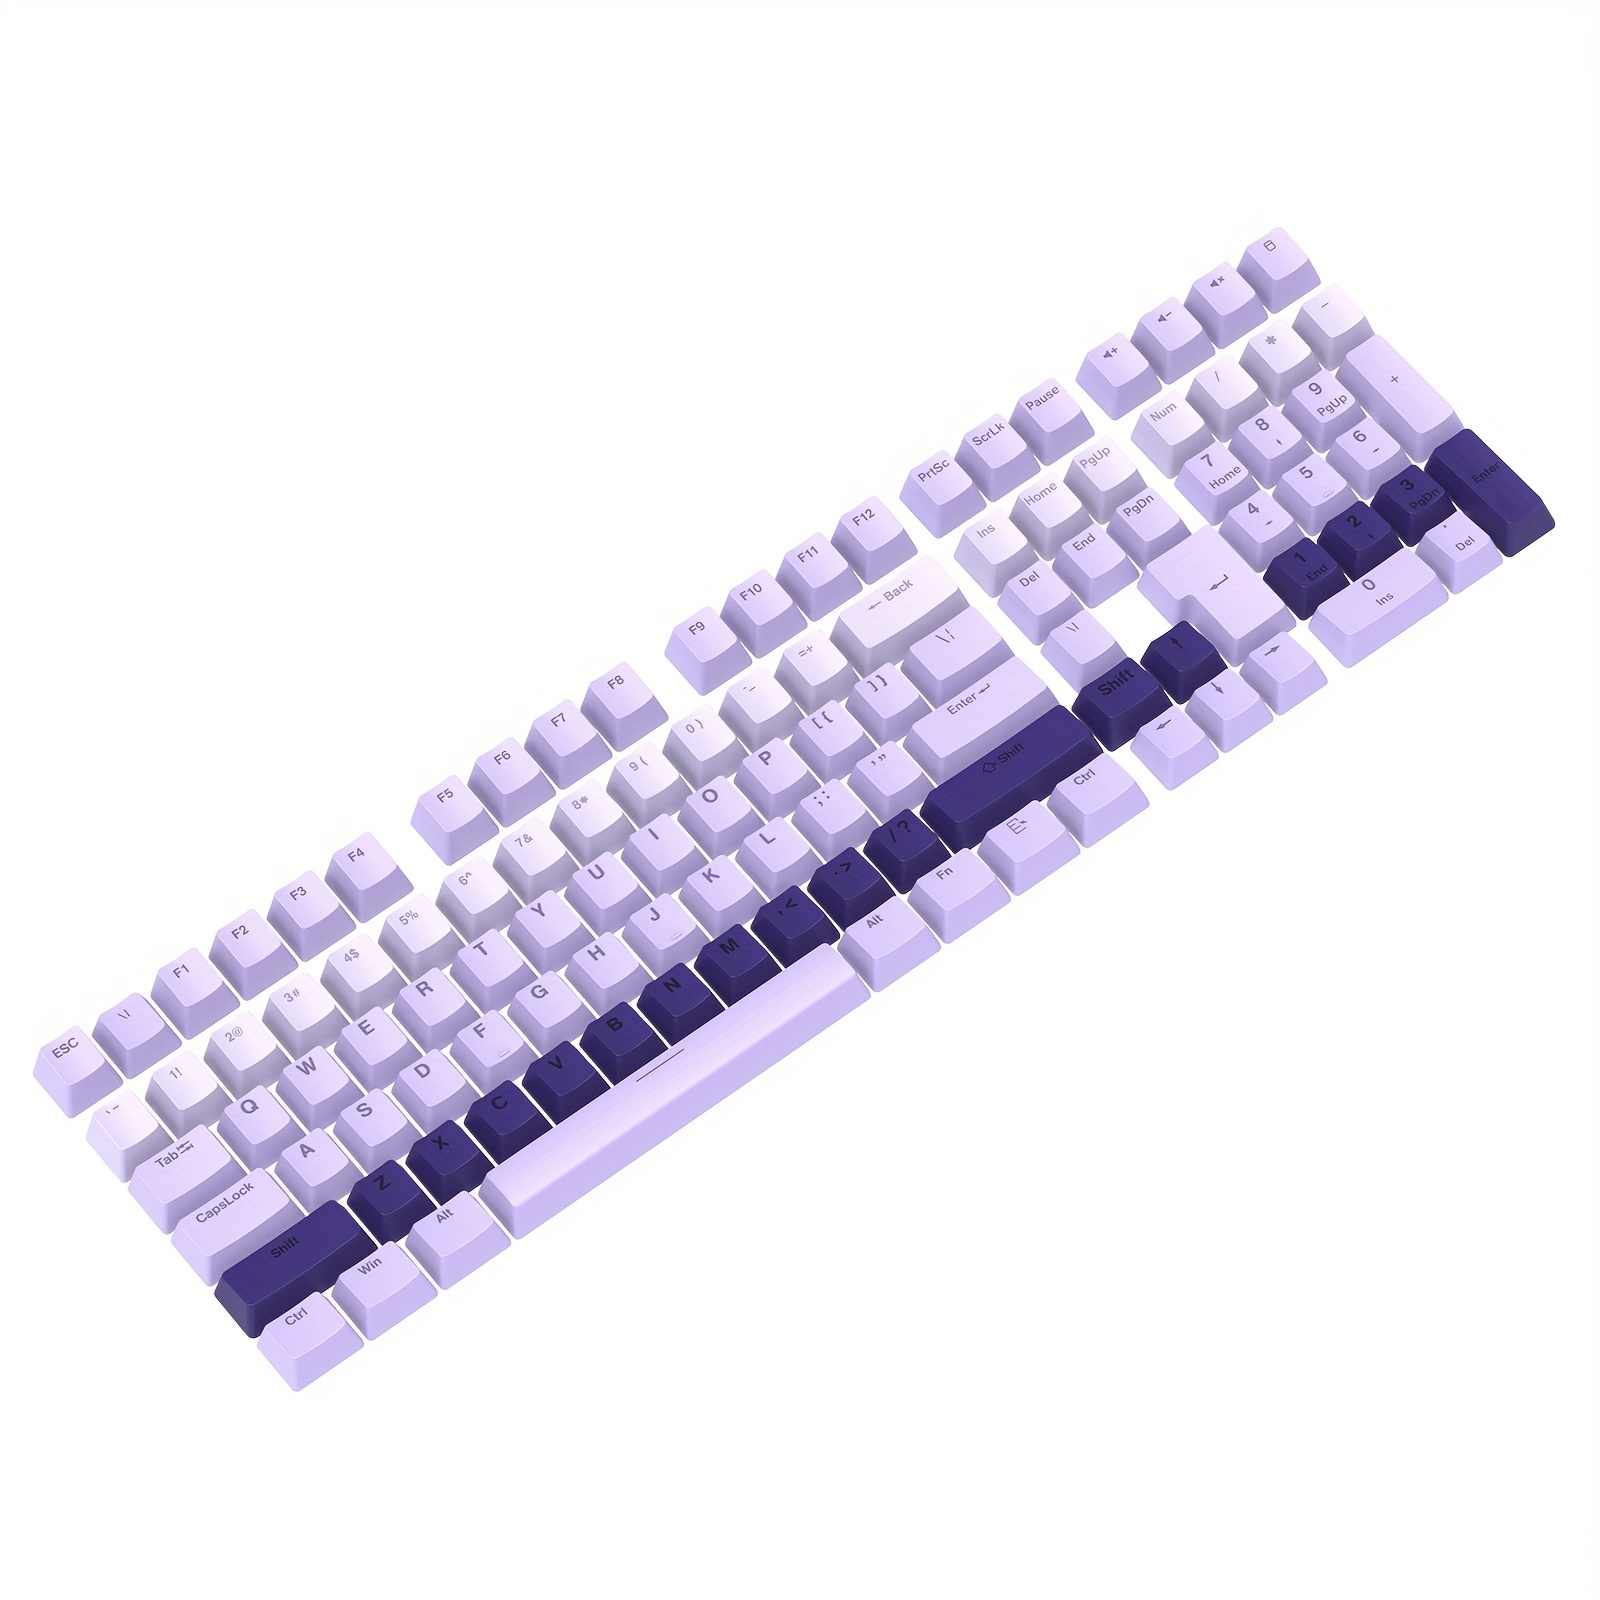 PBT keycaps，OEM keycaps with Keycaps Puller for Mechanical Keyboard  Compatible with MX-Clone Switches (Purple) キーボード